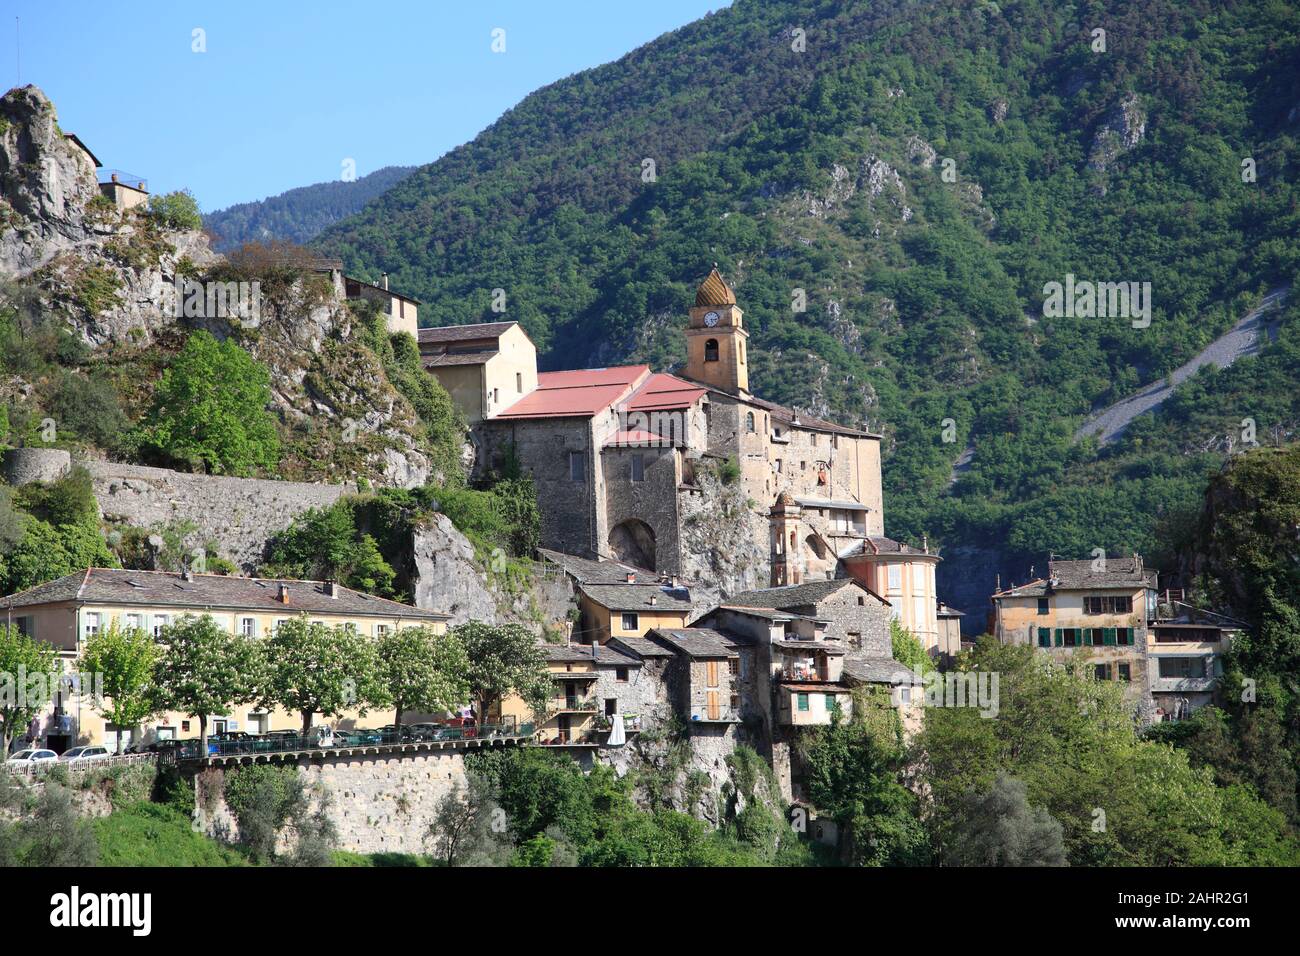 Saorge, Perched Medieval Village, Roya Valley, Alpes-Maritimes, Cote d'Azur, French Riviera, Provence, France, Europe Stock Photo